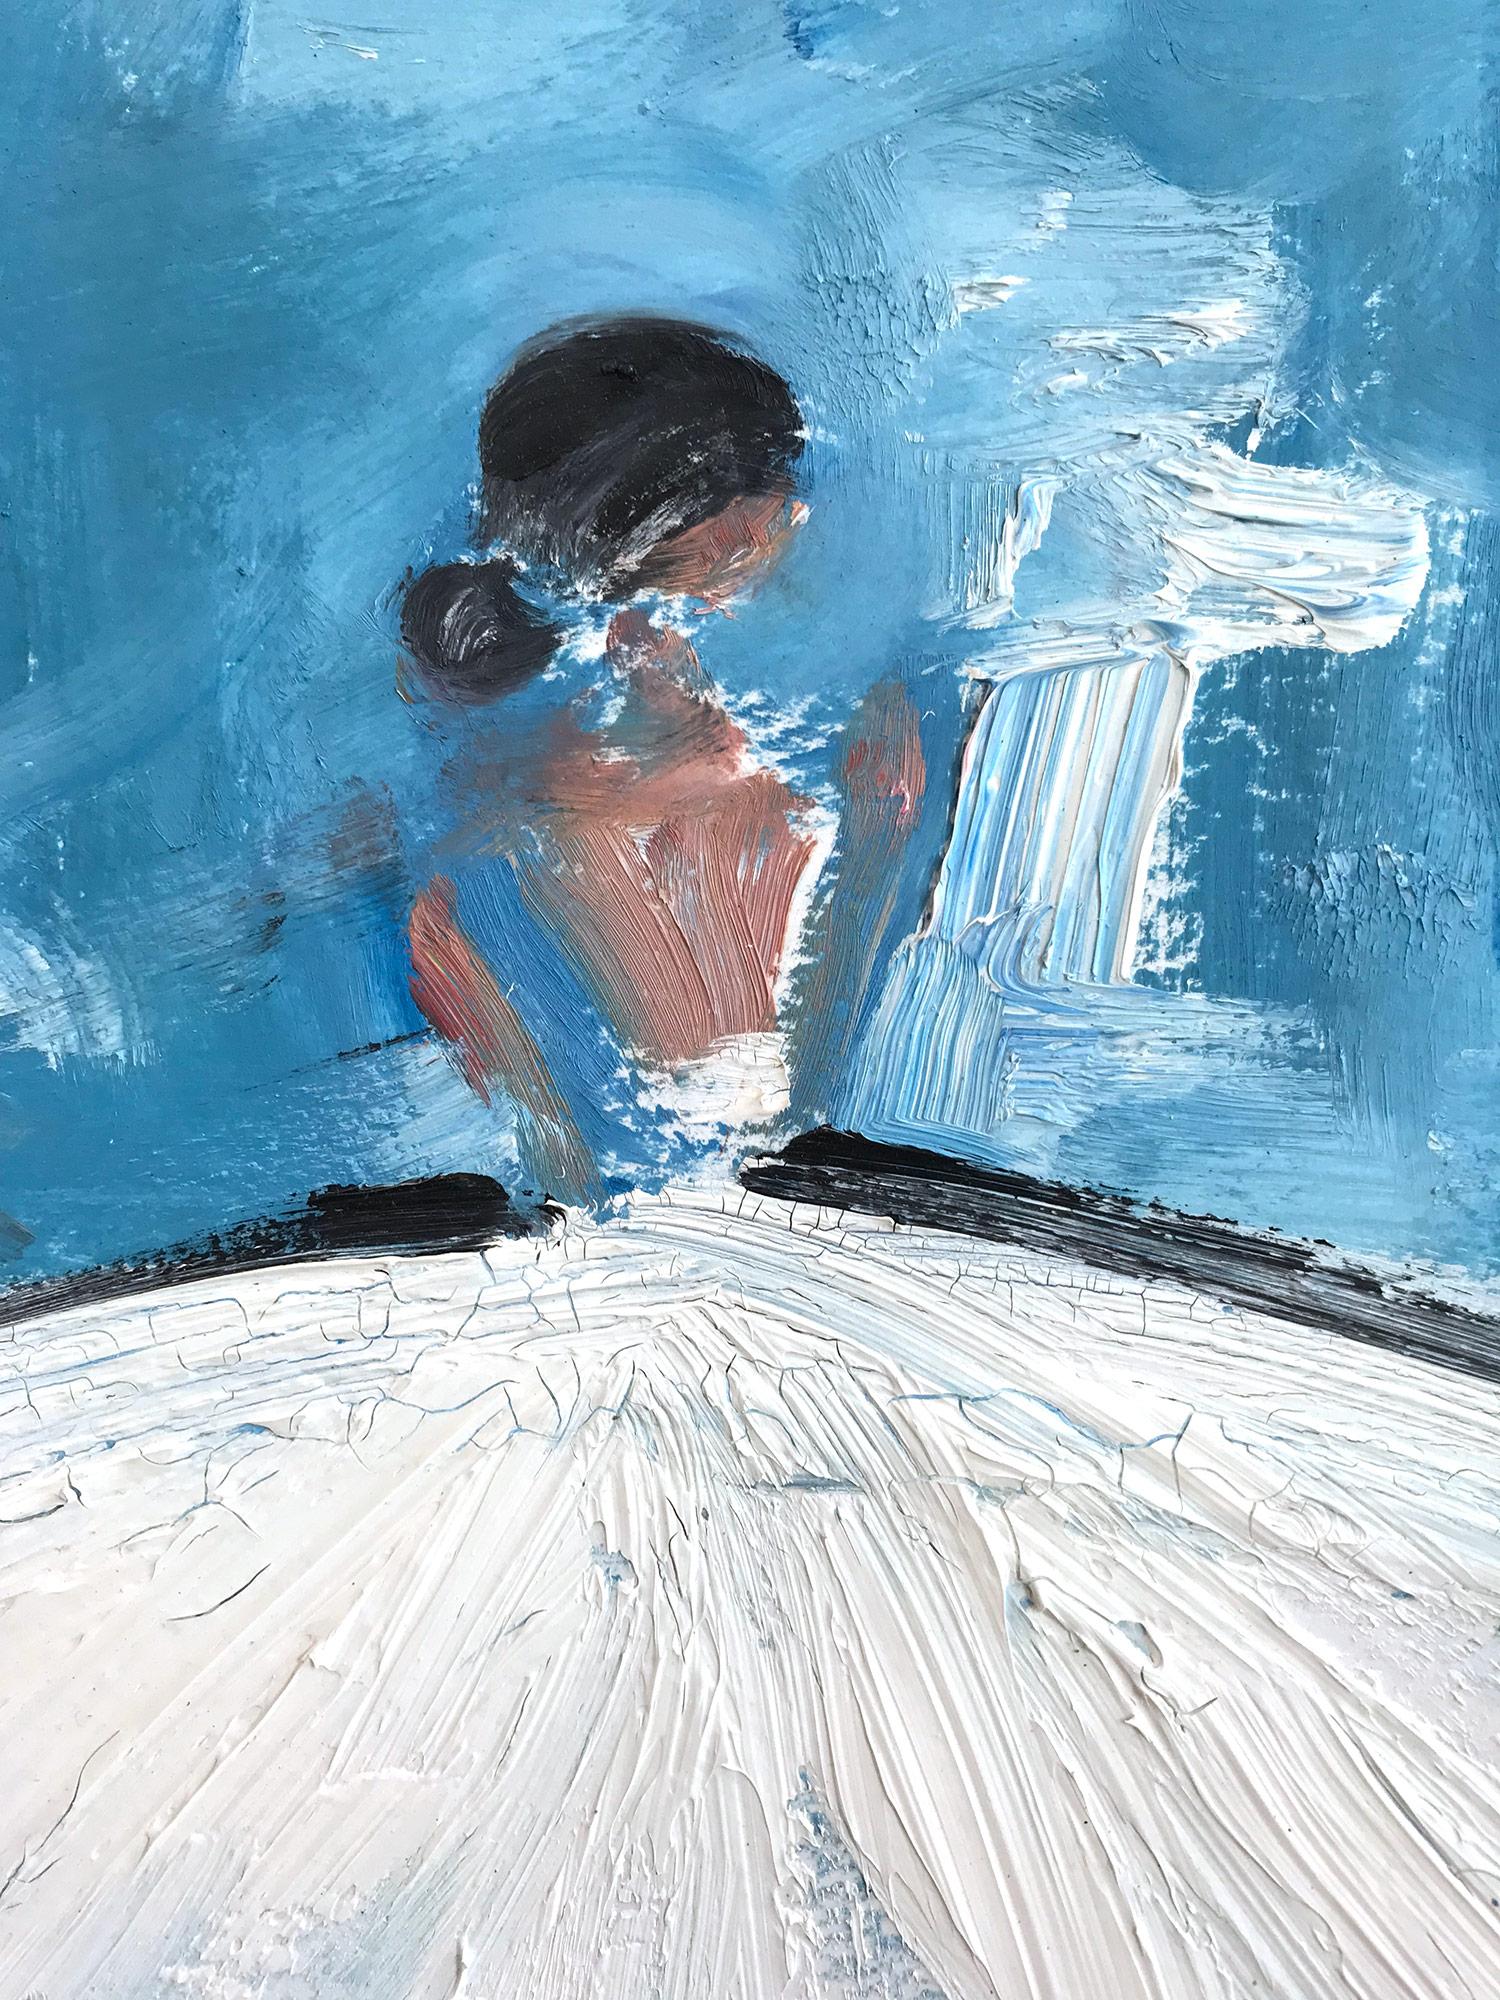 An abstract, whimsical and bold depiction of a woman standing gracefully in a white gown against a turquoise blue background with delicate details. This piece captures the essence of fashion in Pairs. Done in a very modern and impressionistic style,